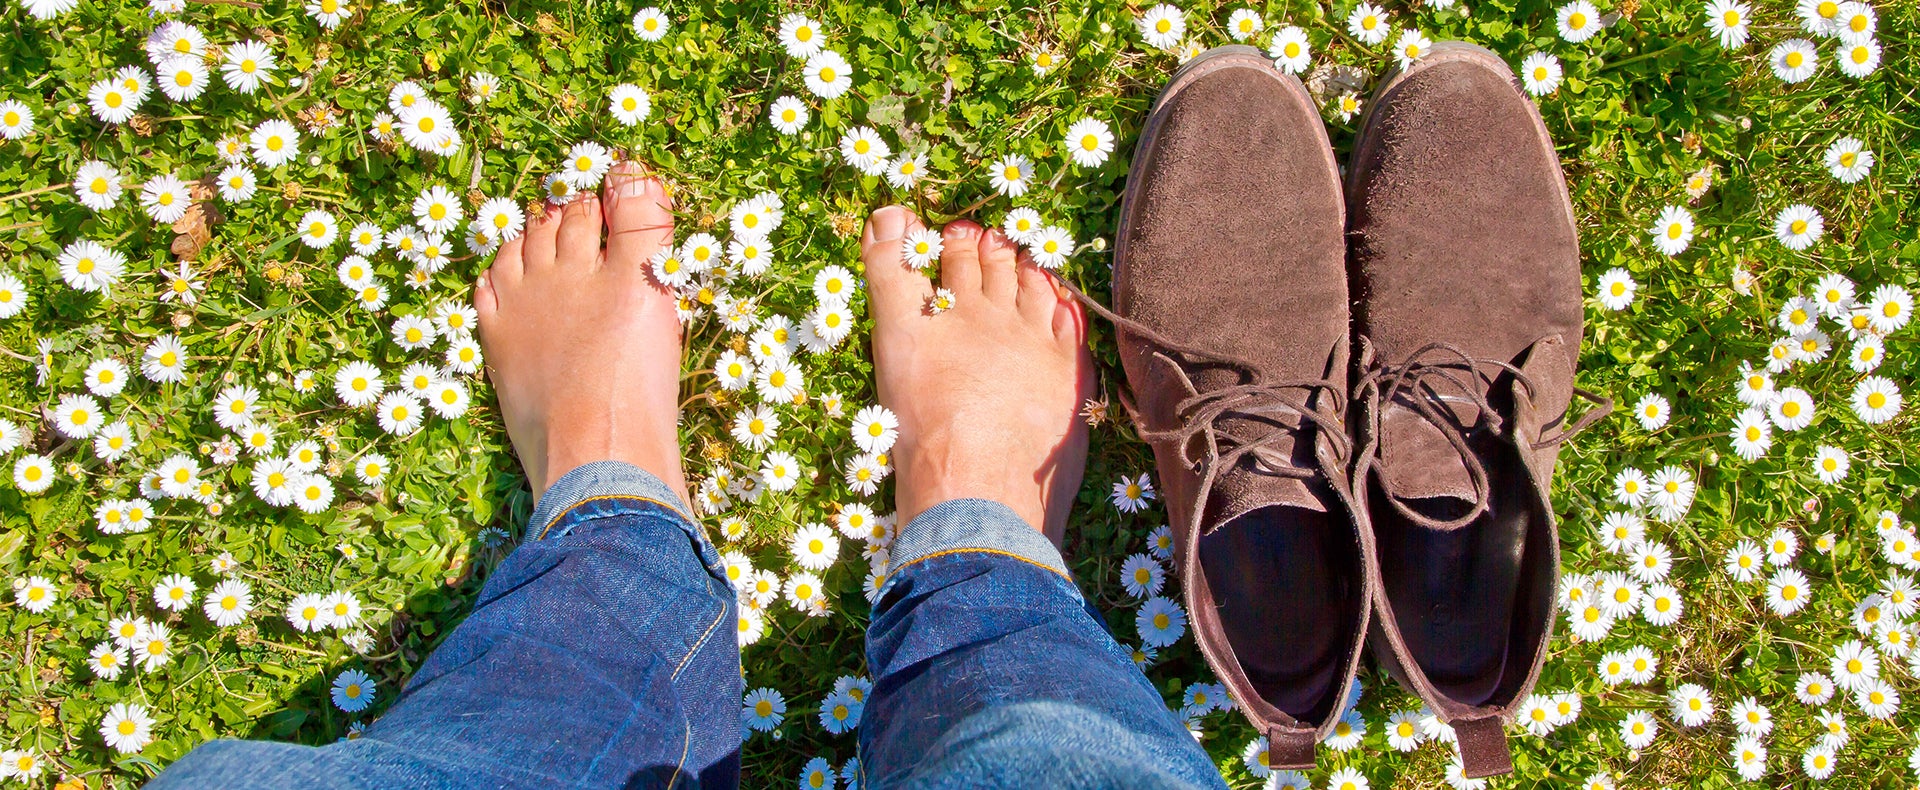 Tips & Exercises for Healthy, Pain-Free Feet  Earth Runners Sandals -  Reconnecting Feet with Nature